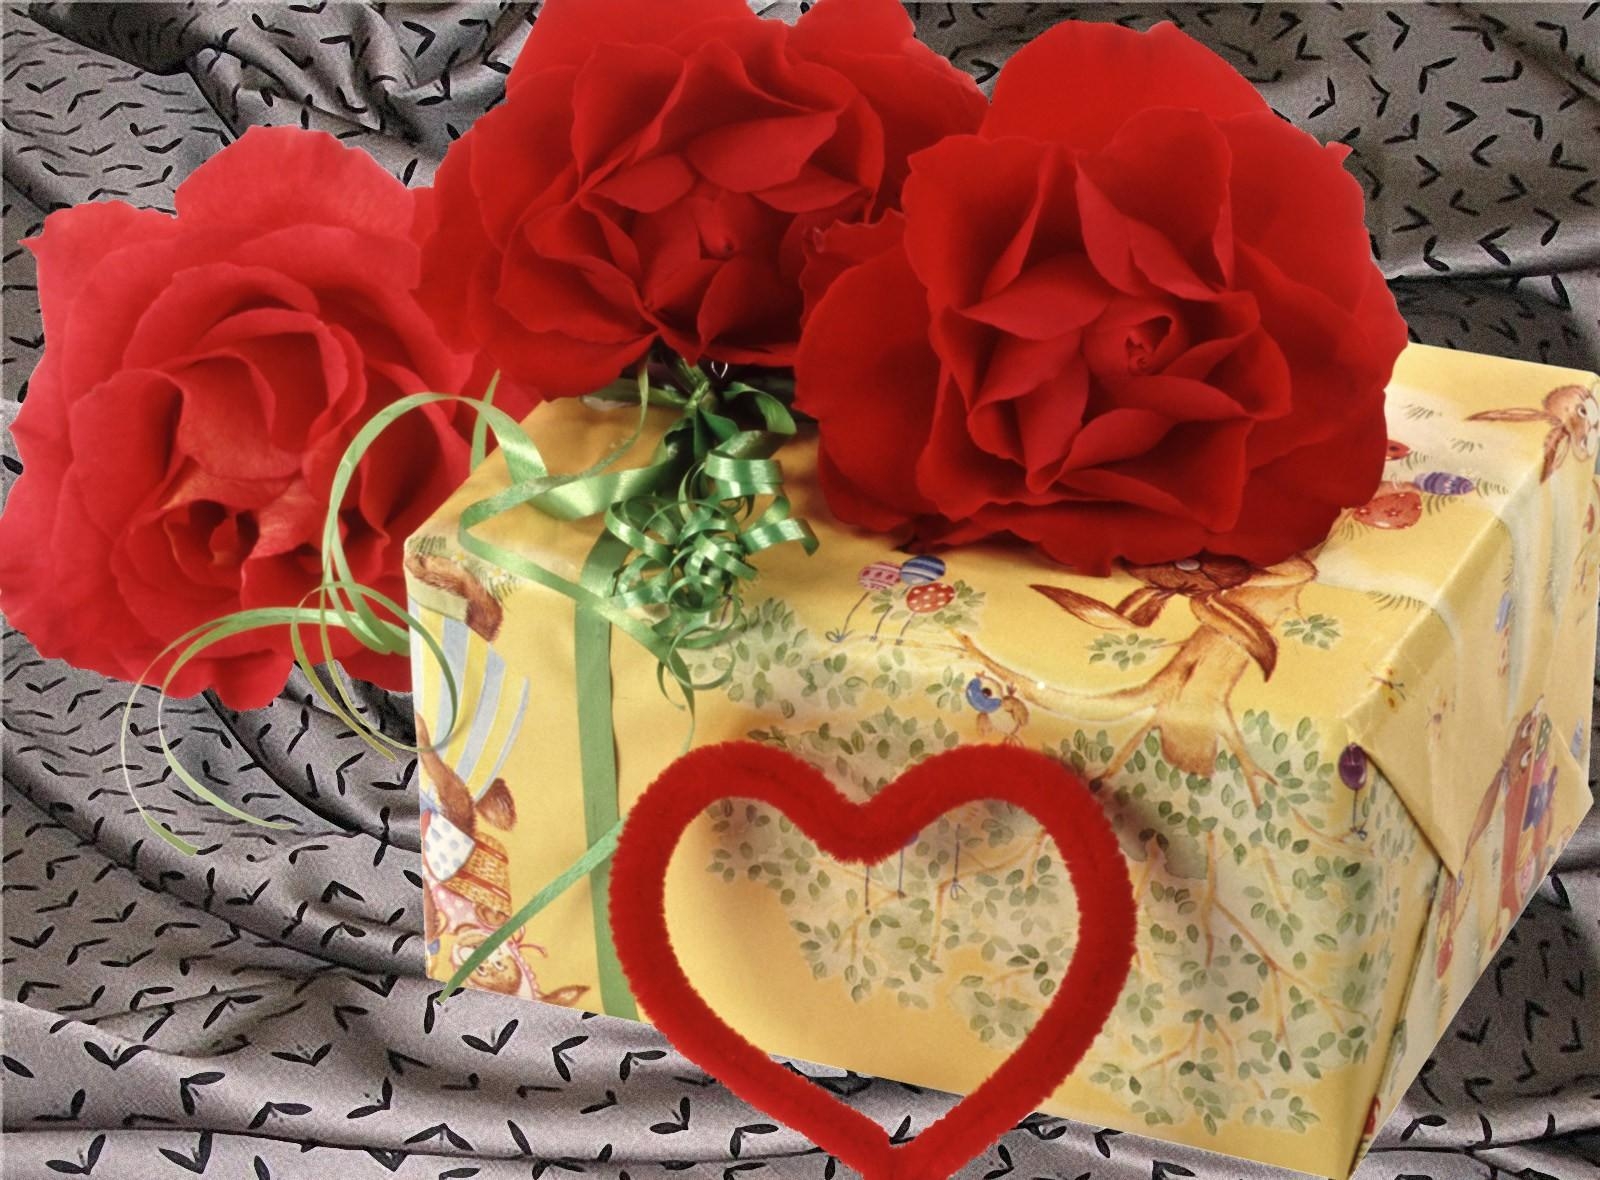 holidays, carnations, present, gift, heart, valentine's day